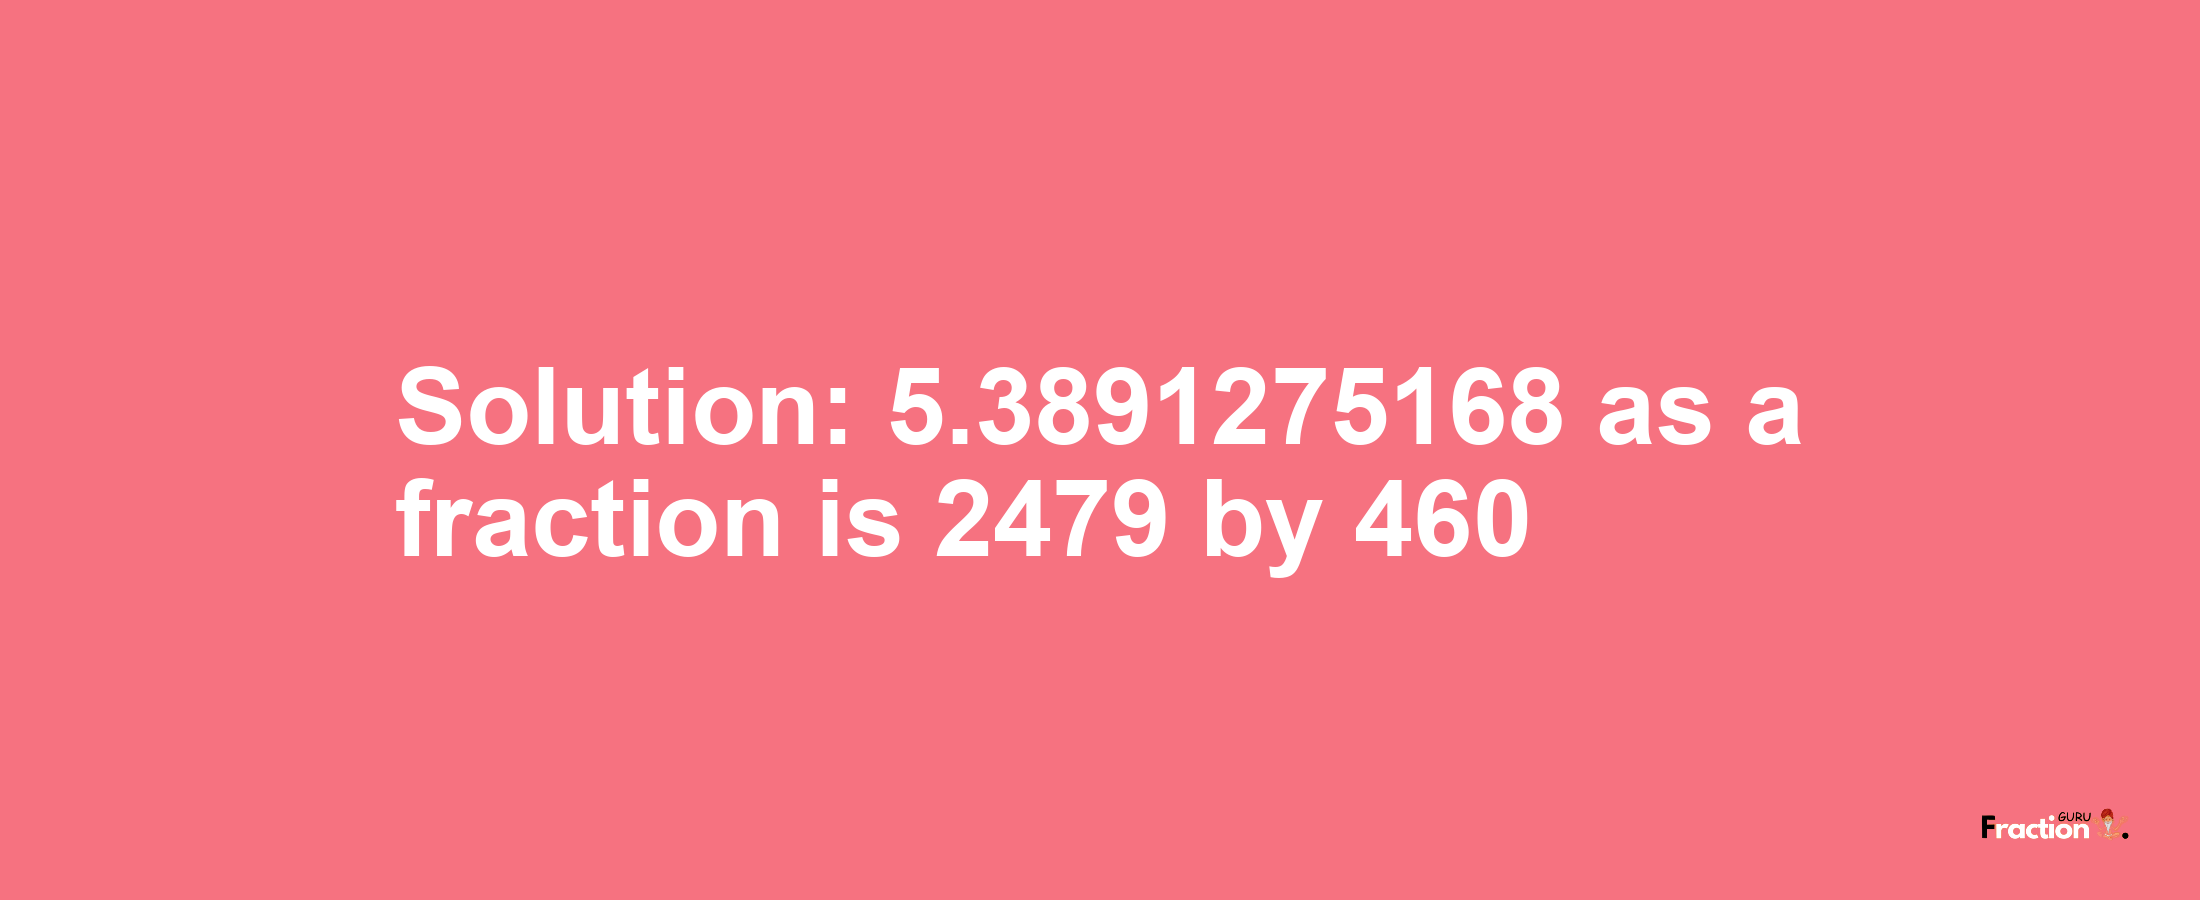 Solution:5.3891275168 as a fraction is 2479/460